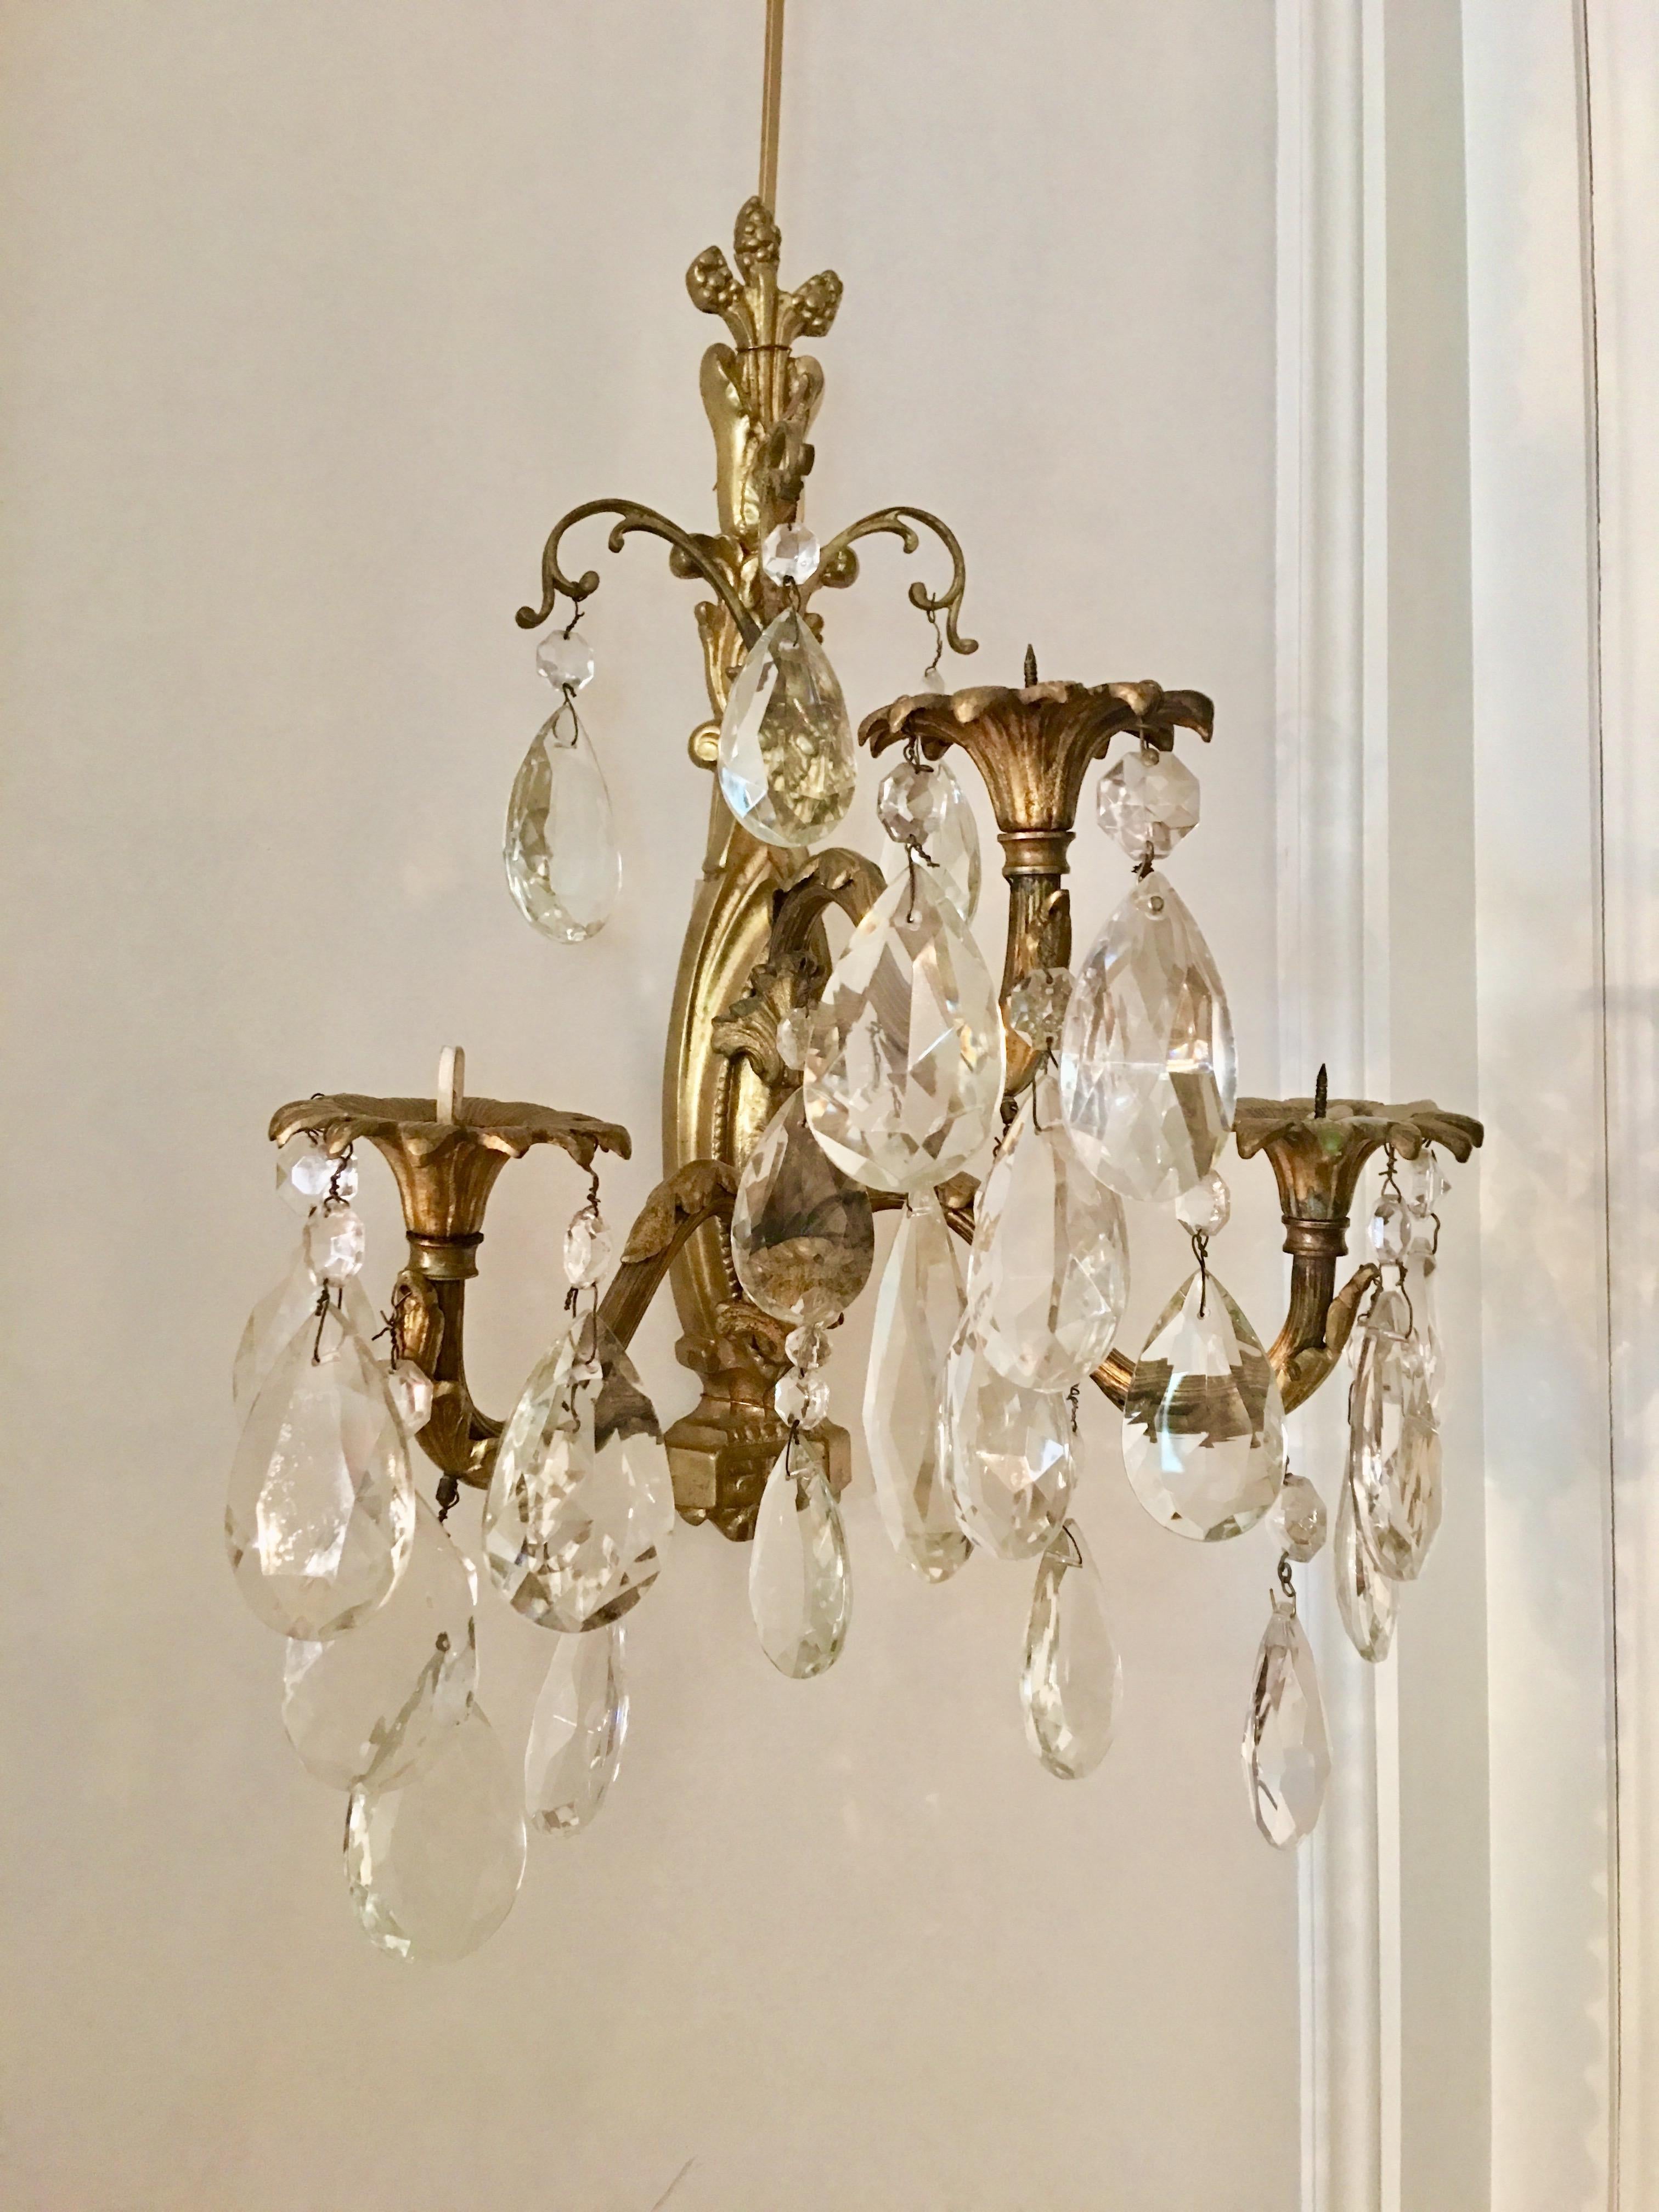 Delightful pair of 3-branch Louis XV style gilt bronze and crystal pendant wall sconces. Each candle arm features candle holders (bobèches) in the form of a blooming flower. Candelight is gently reflected by hanging crystals. Non-electrified.